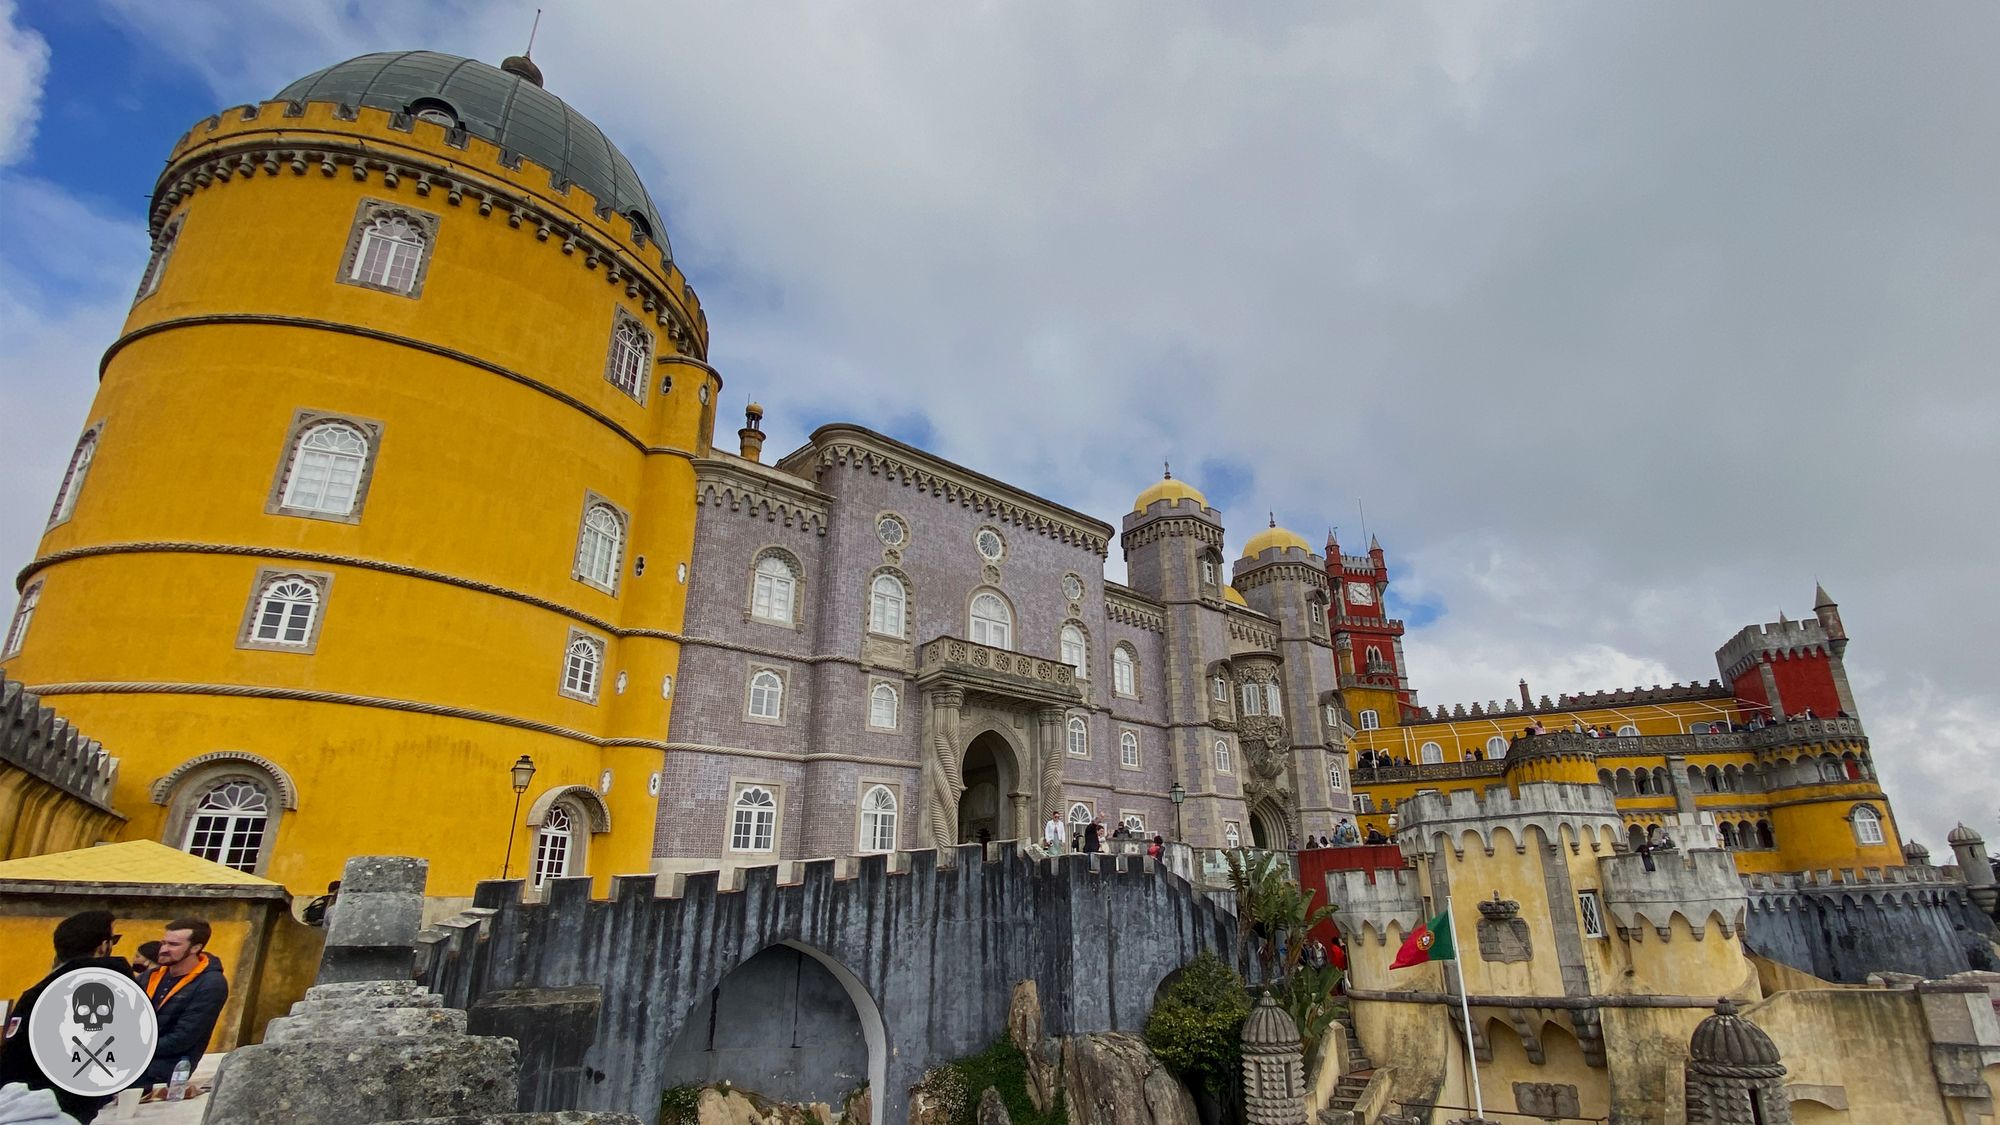 Yellow and red castle with intricate details